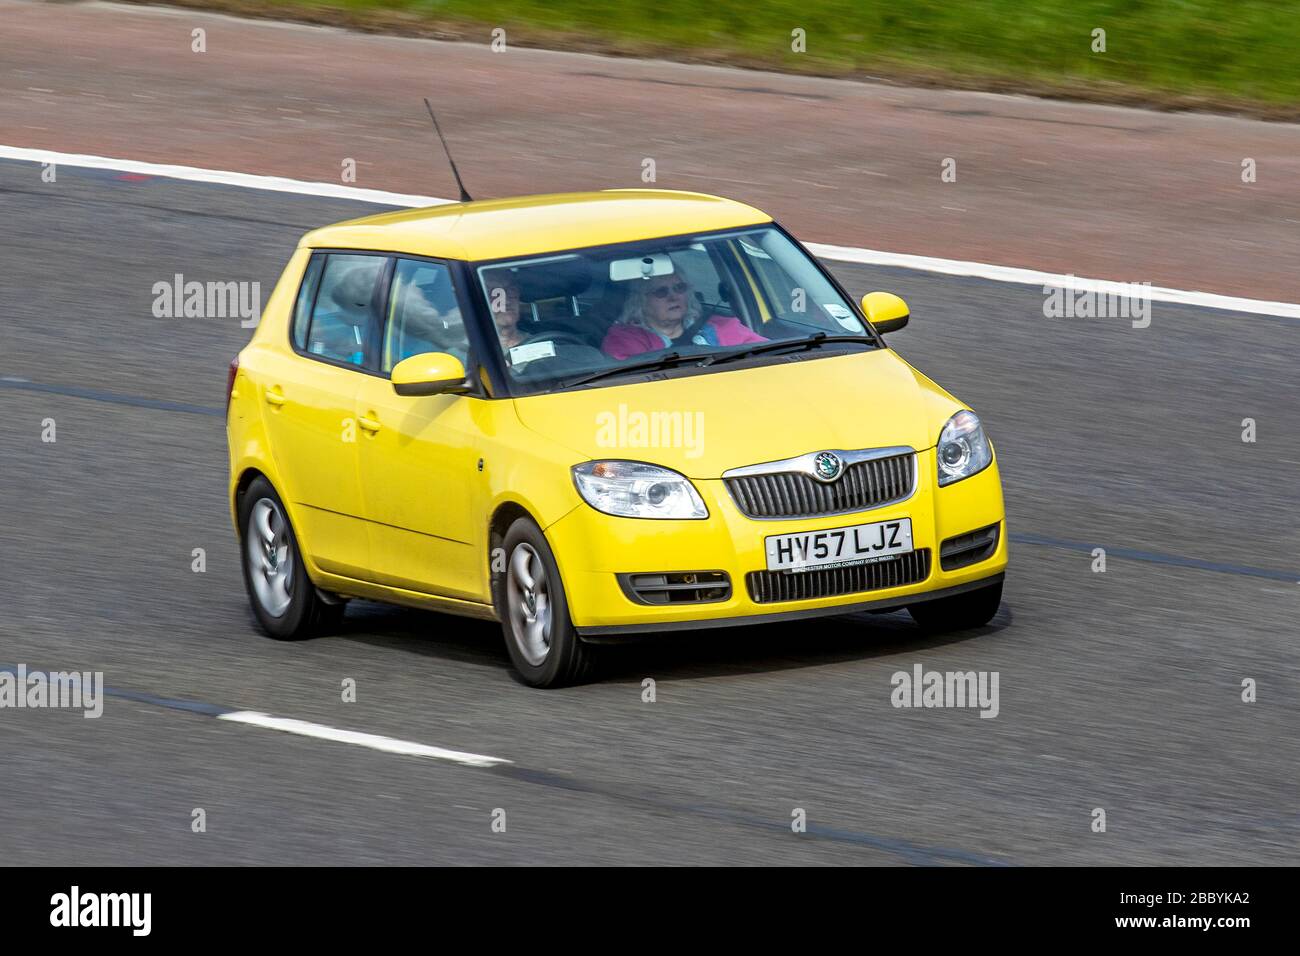 Skoda 105 High Resolution Stock Photography and Images - Alamy